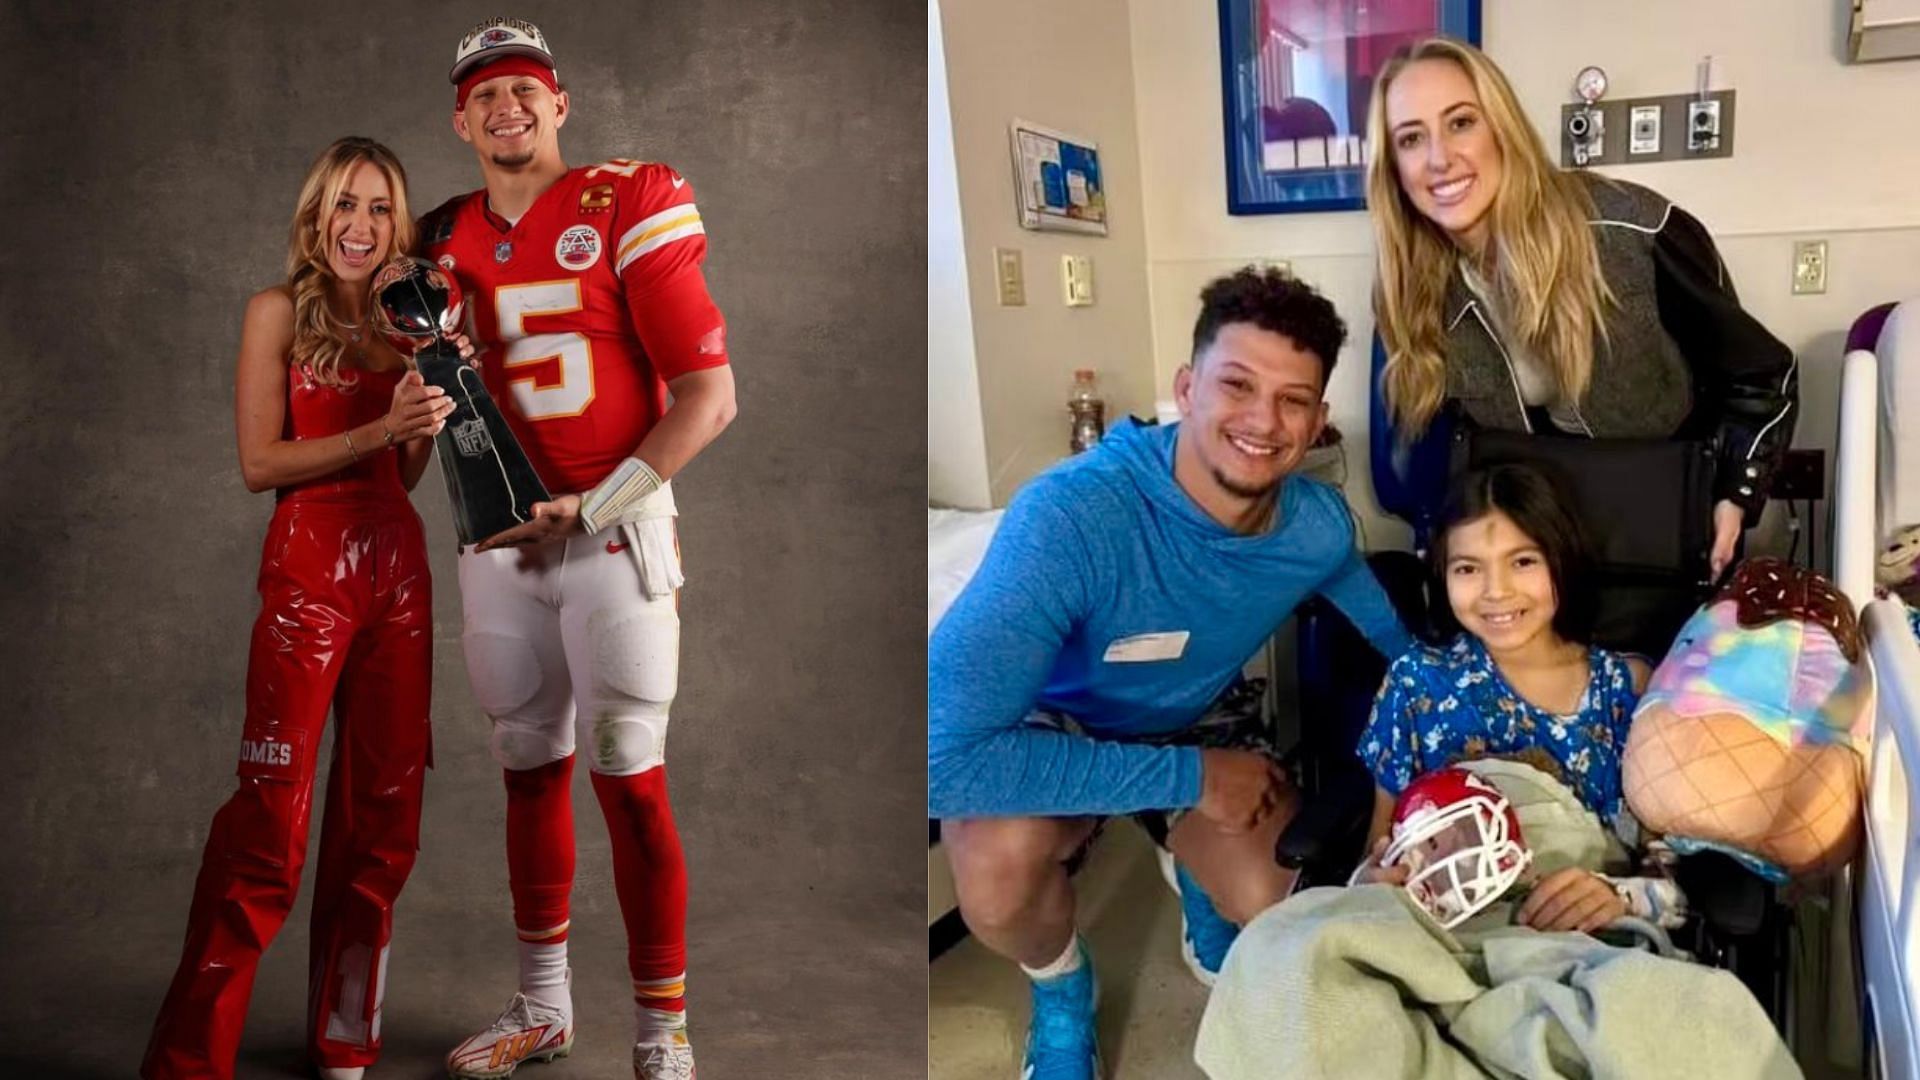 Brittany and Patrick Mahomes visited tow sisters who were injury in the shotting at the Chiefs